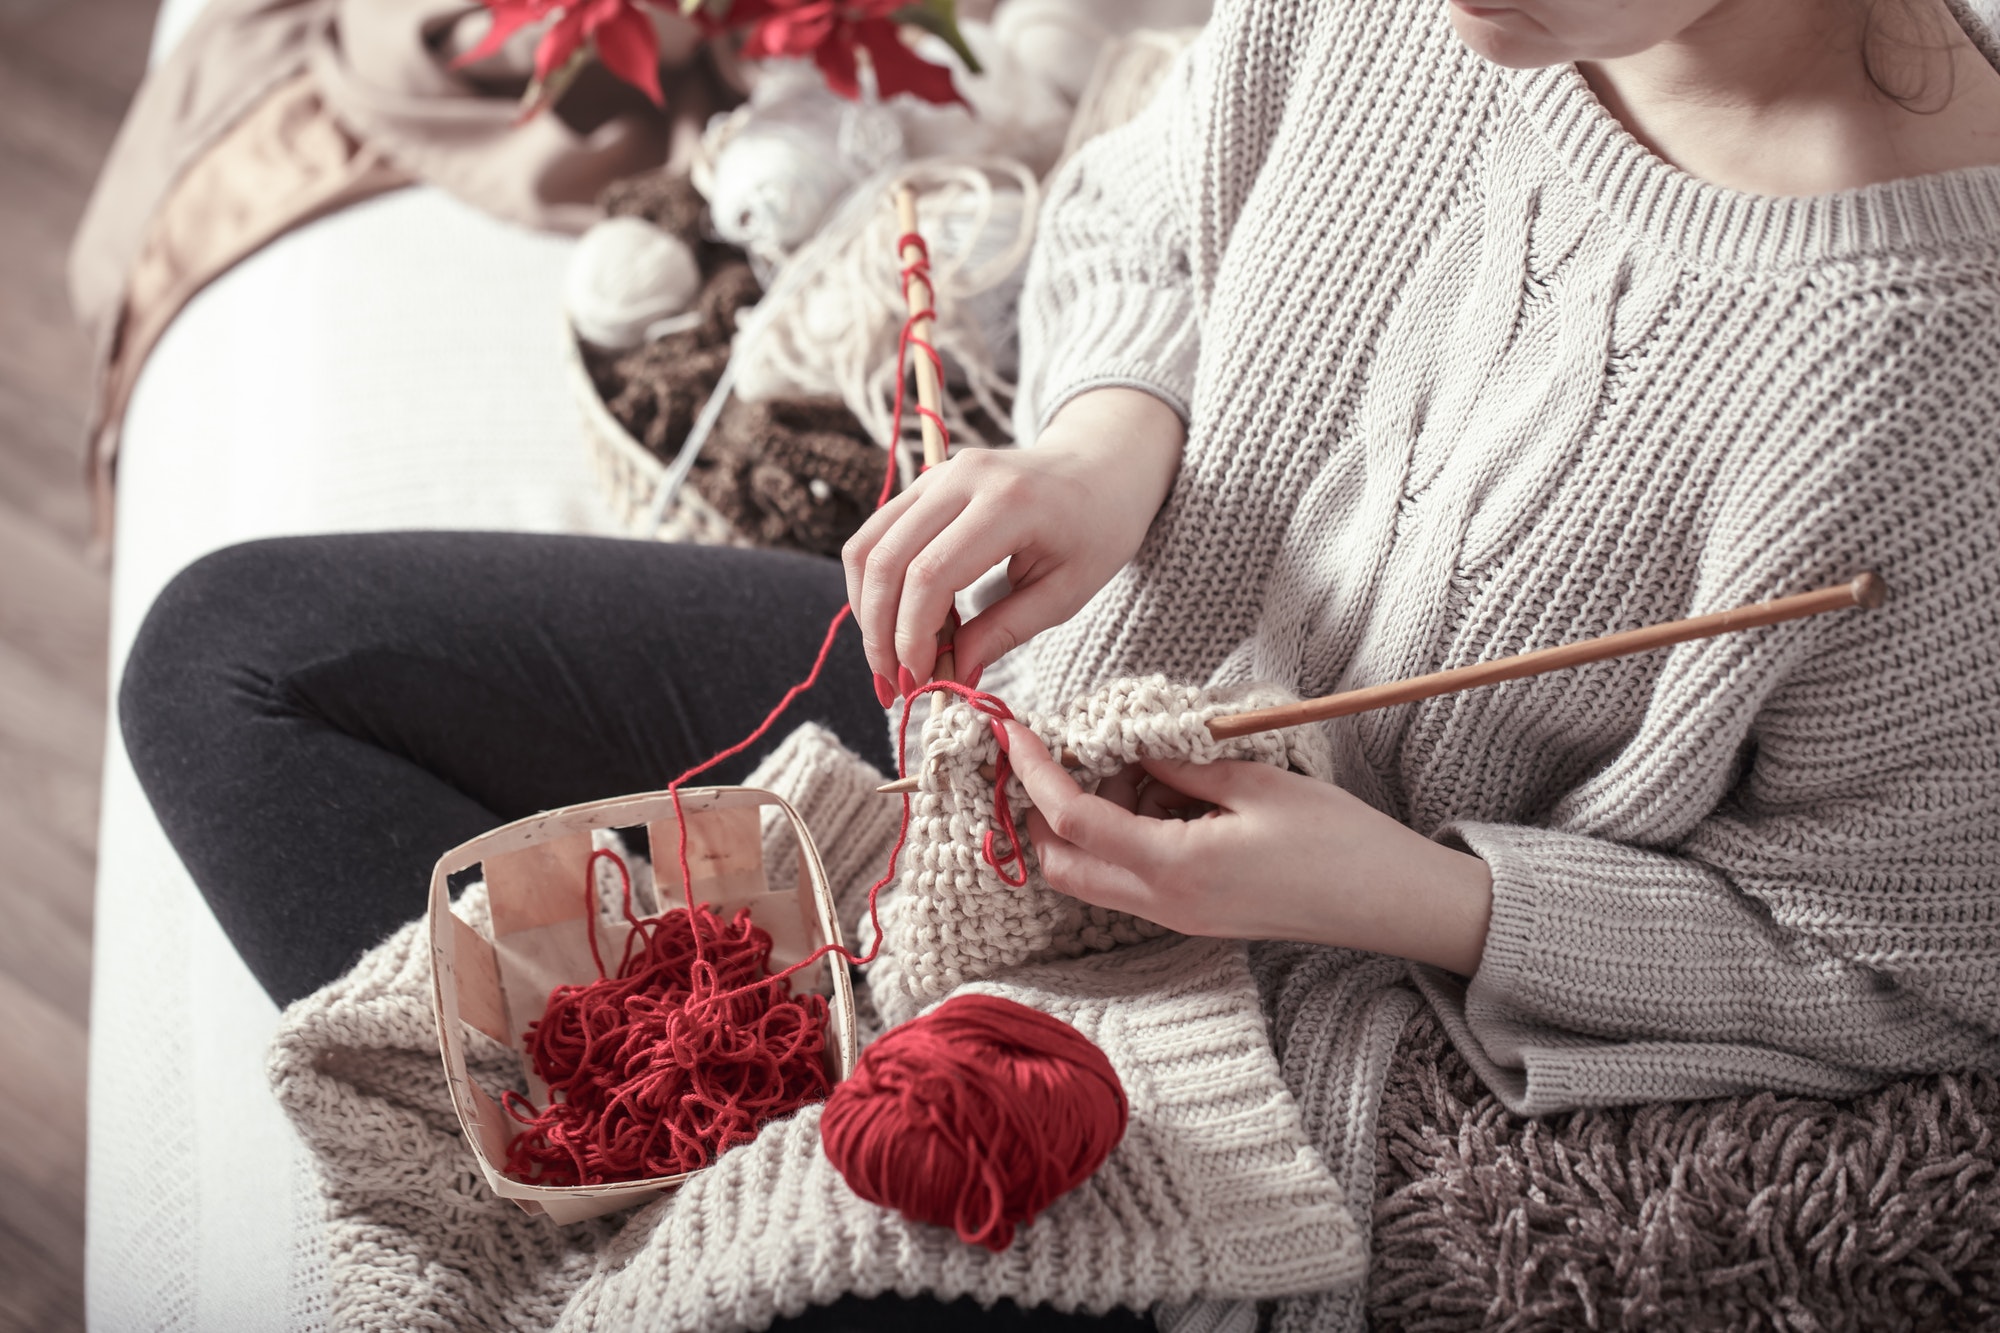 woman knits knitting needles on the couch